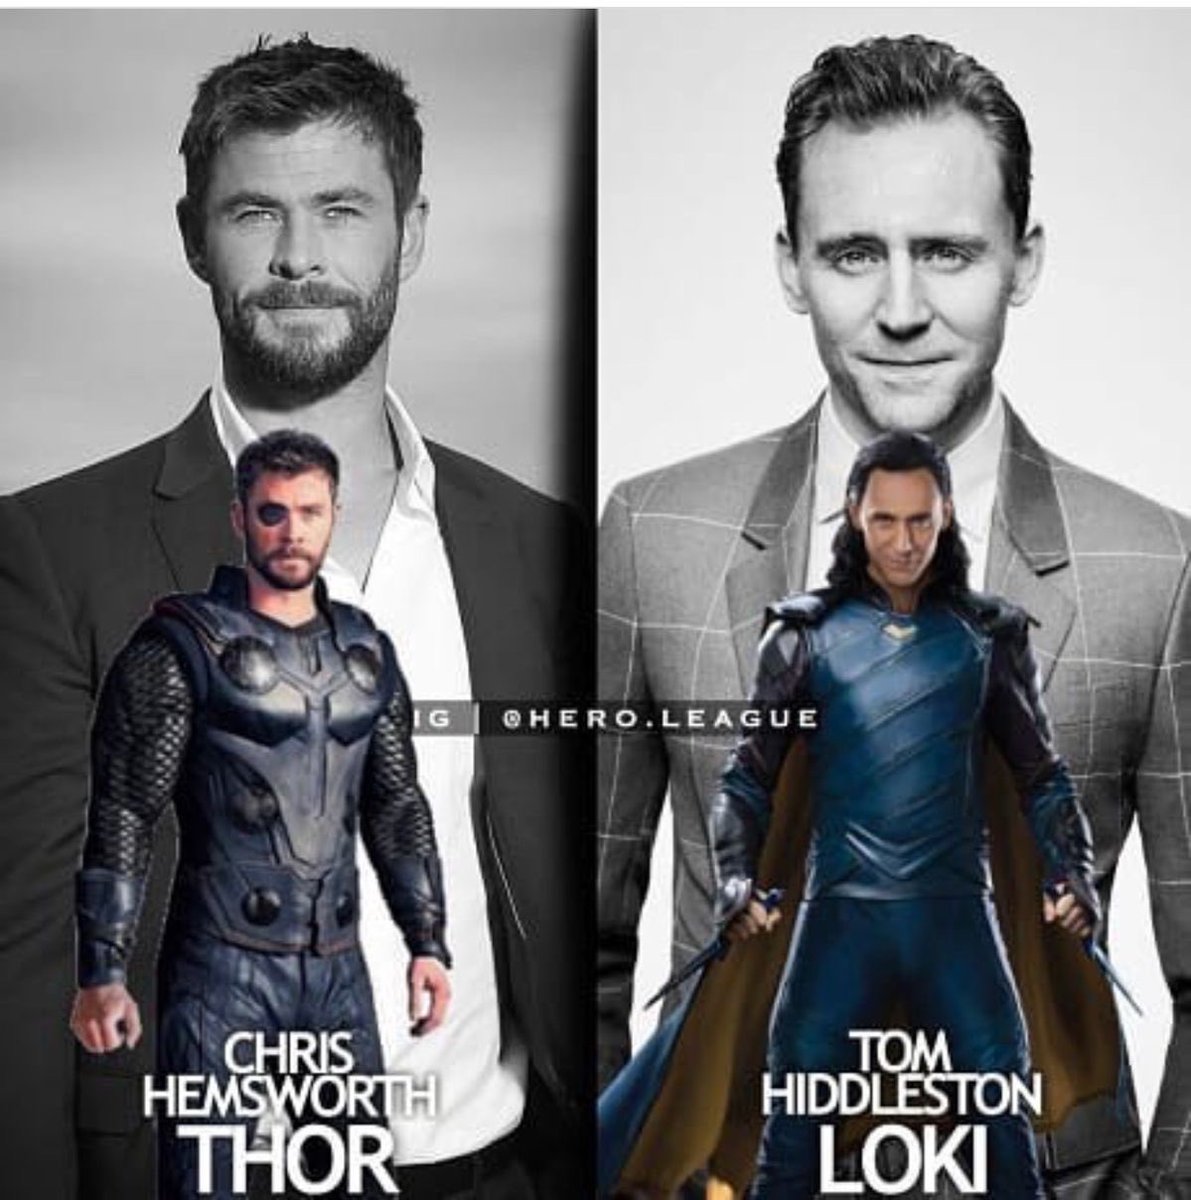 RT @binestom: Thor and Loki - brothers from another mother. 
#Thorsday https://t.co/8Hdlq8r5HO